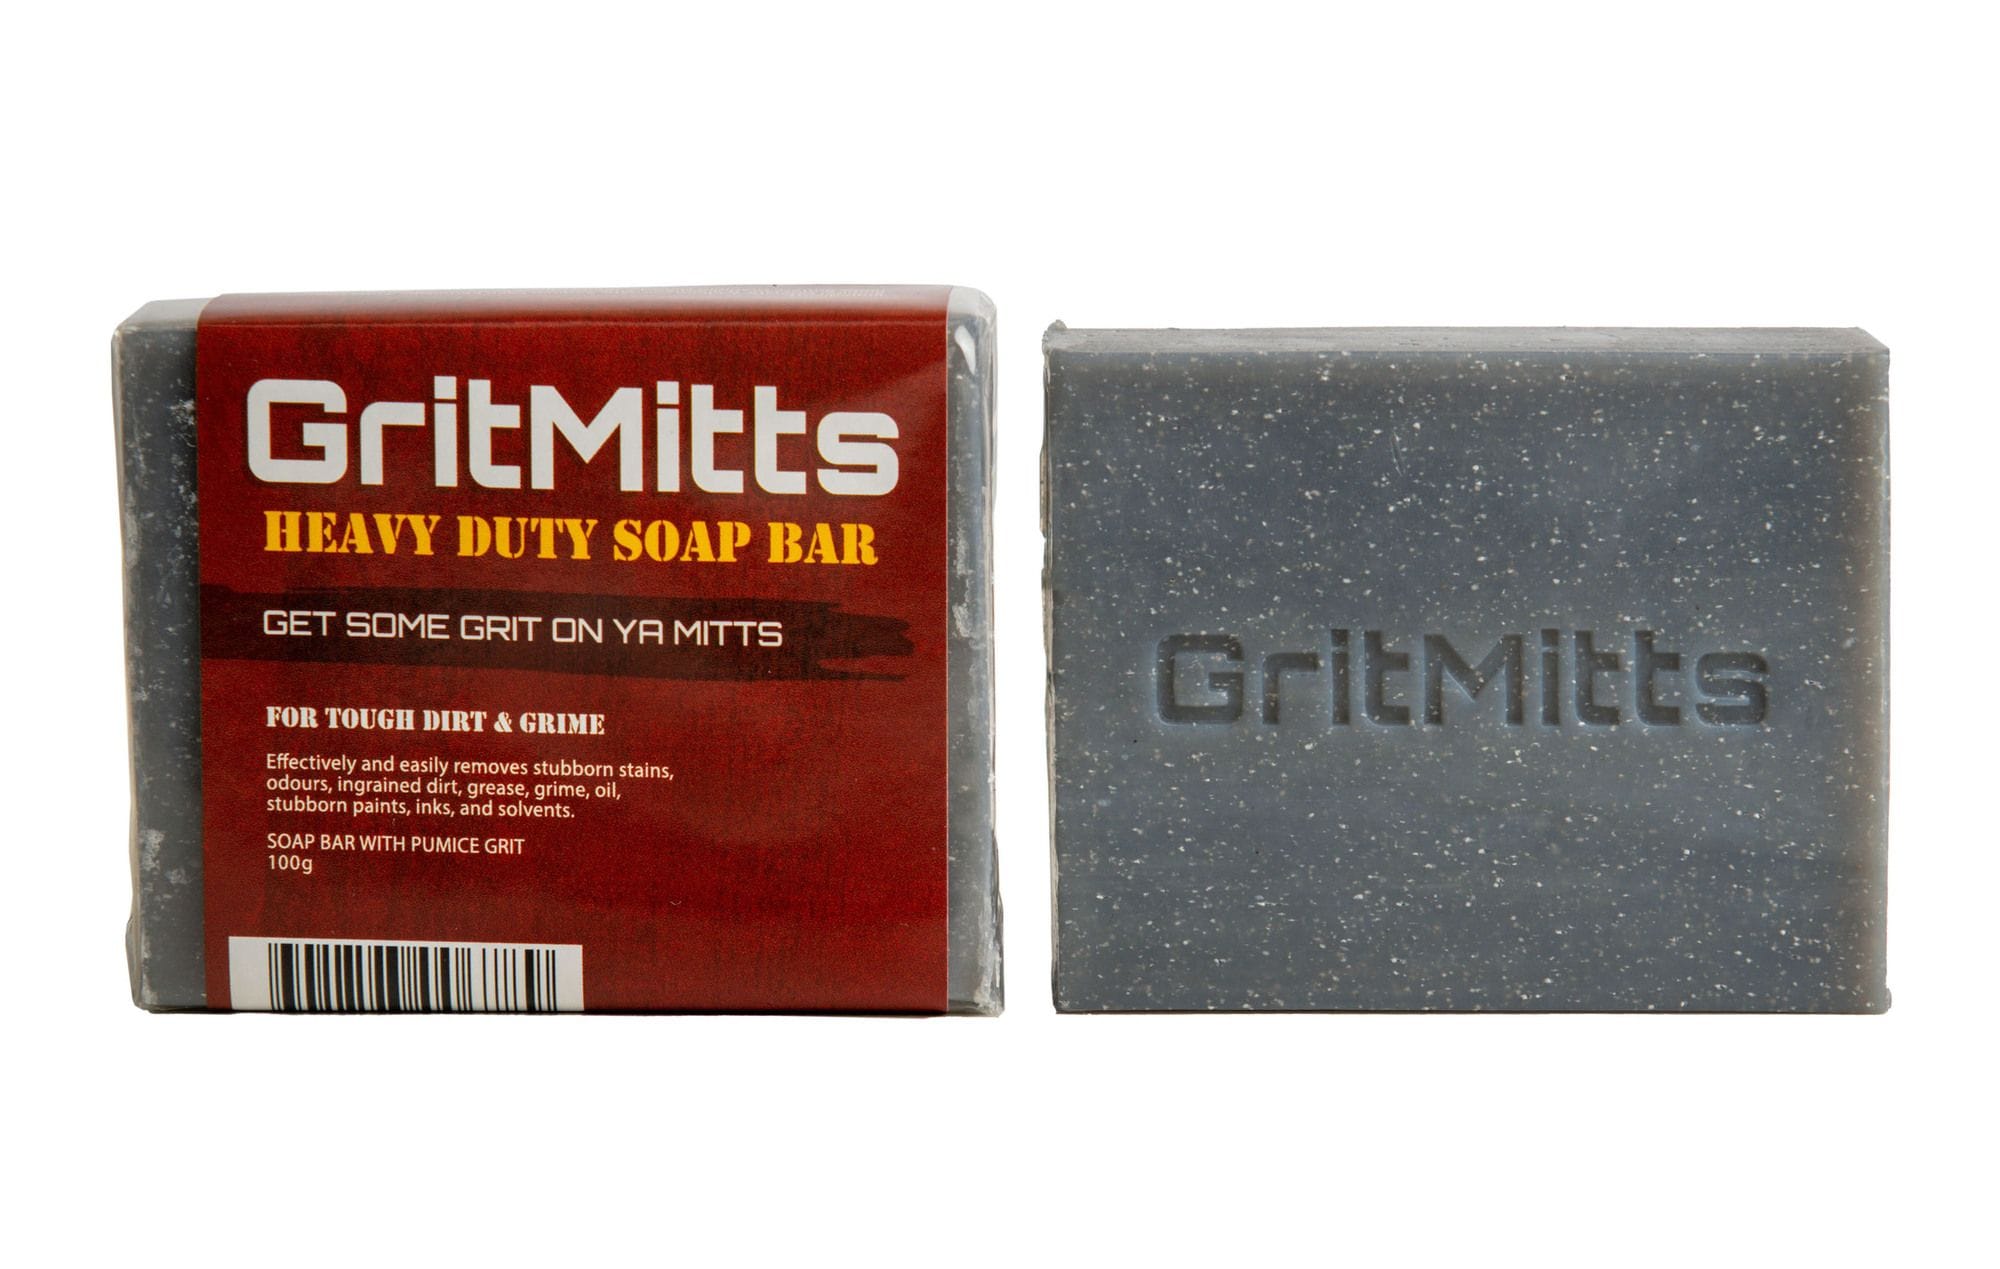 GritMitts